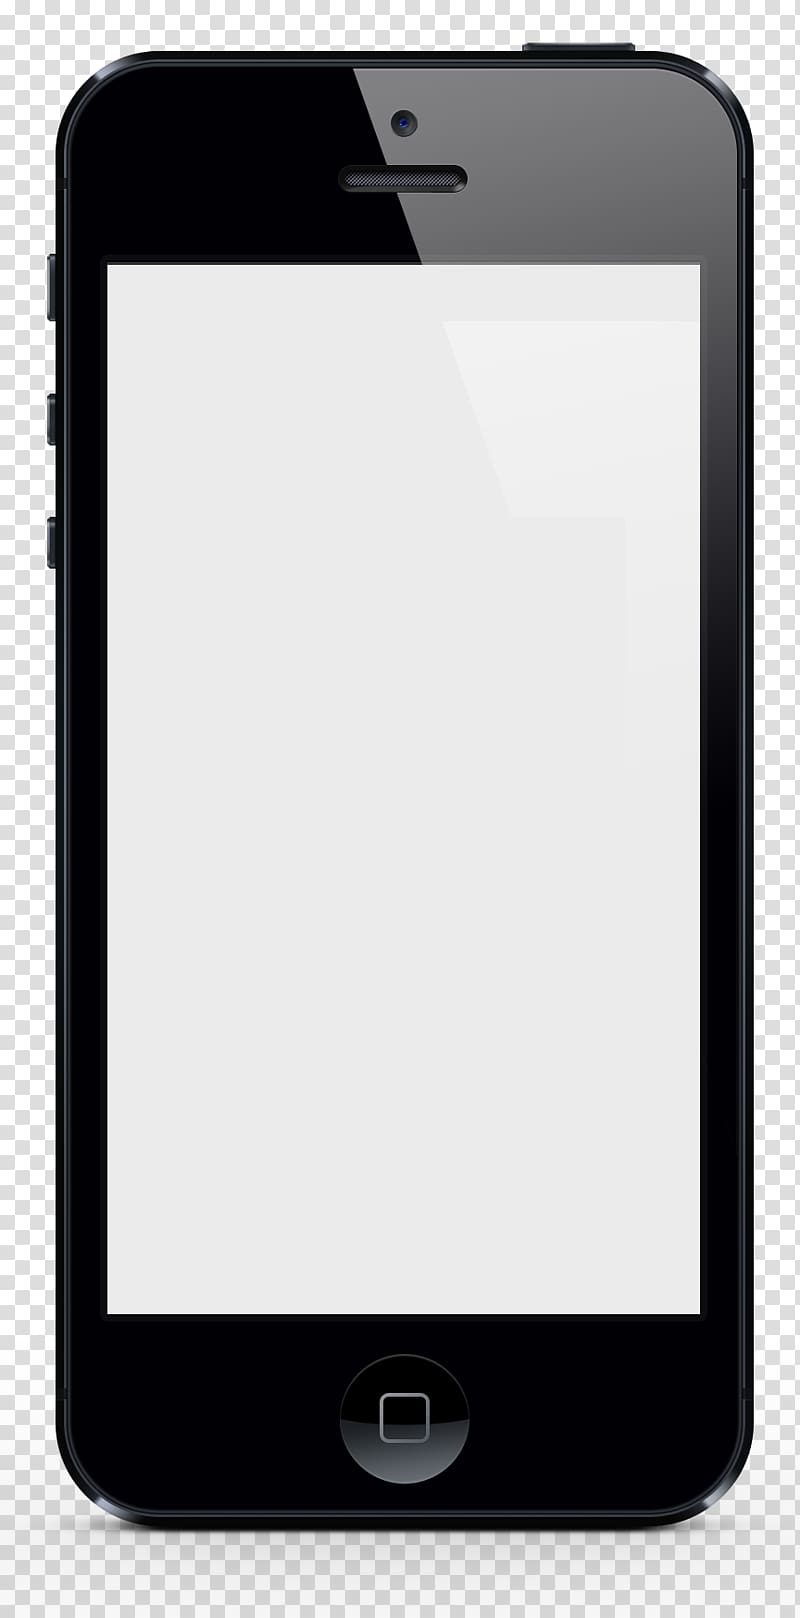 Smartphone Feature phone LeasePlan Bank, smartphone transparent background PNG clipart